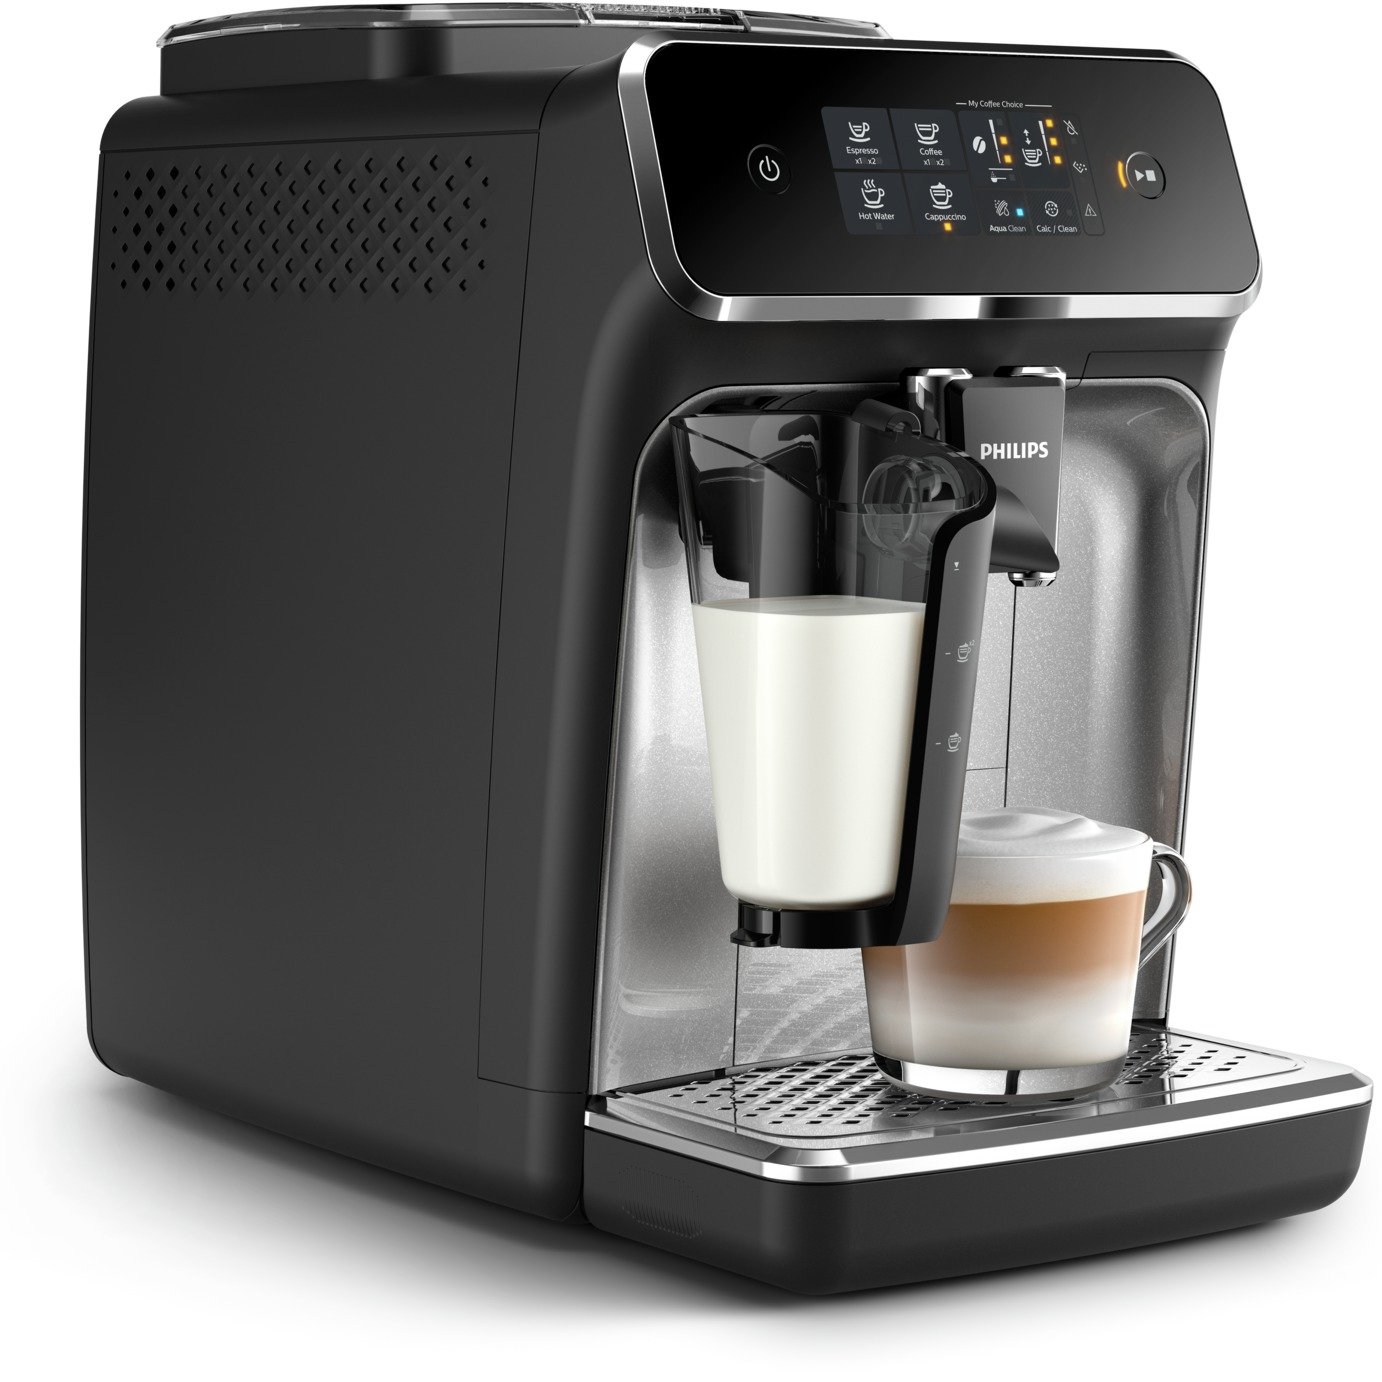 Philips EP2236/40 LatteGo Bean to Cup Coffee Machine